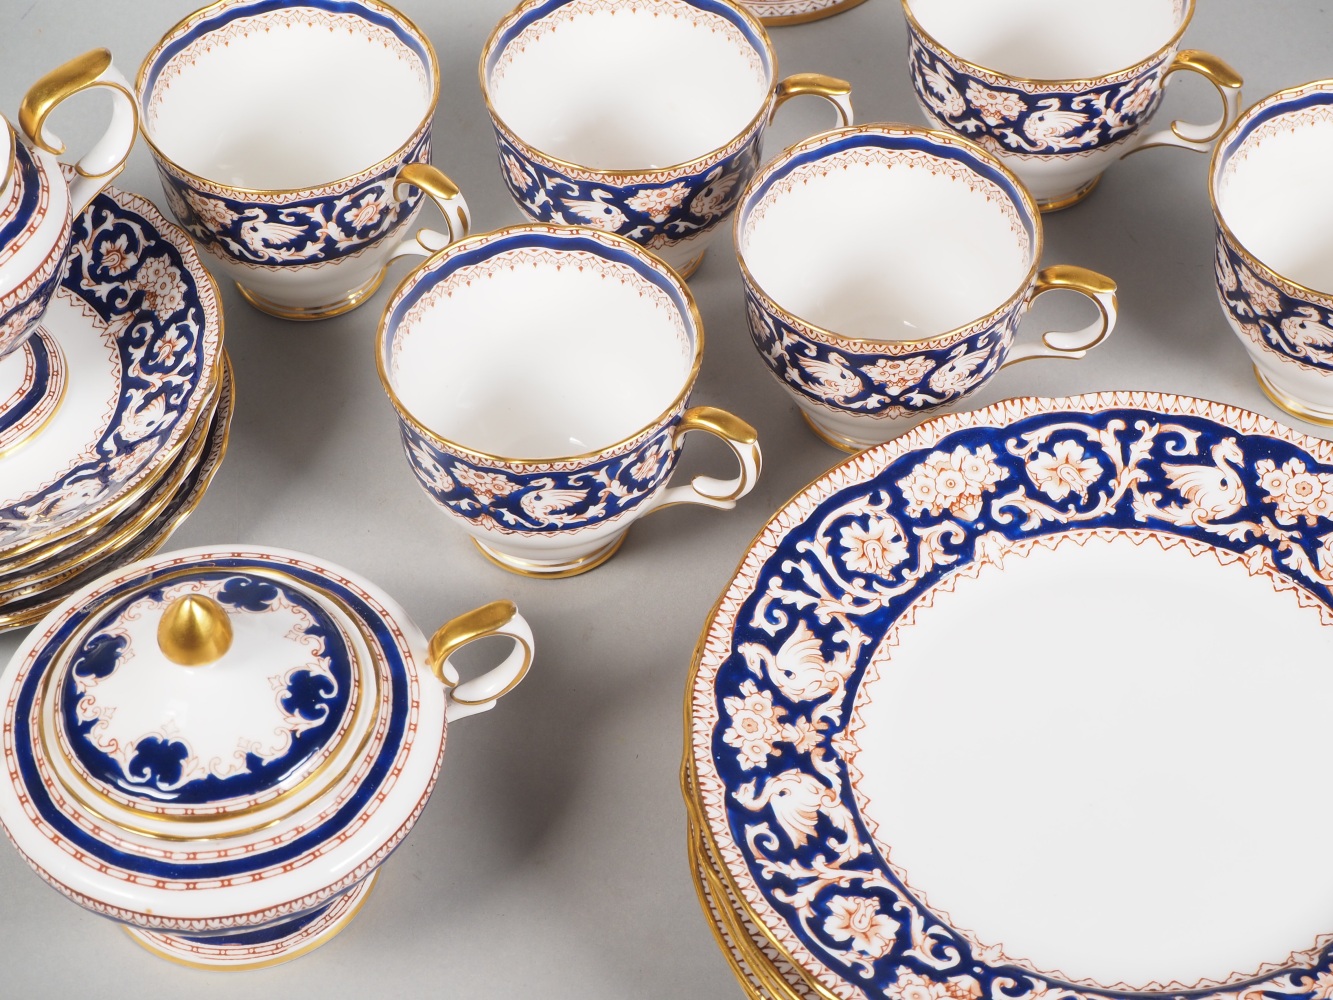 Coffee service Staffordshire Ellesmere for 6 persons, 21 pieces. - Image 3 of 6